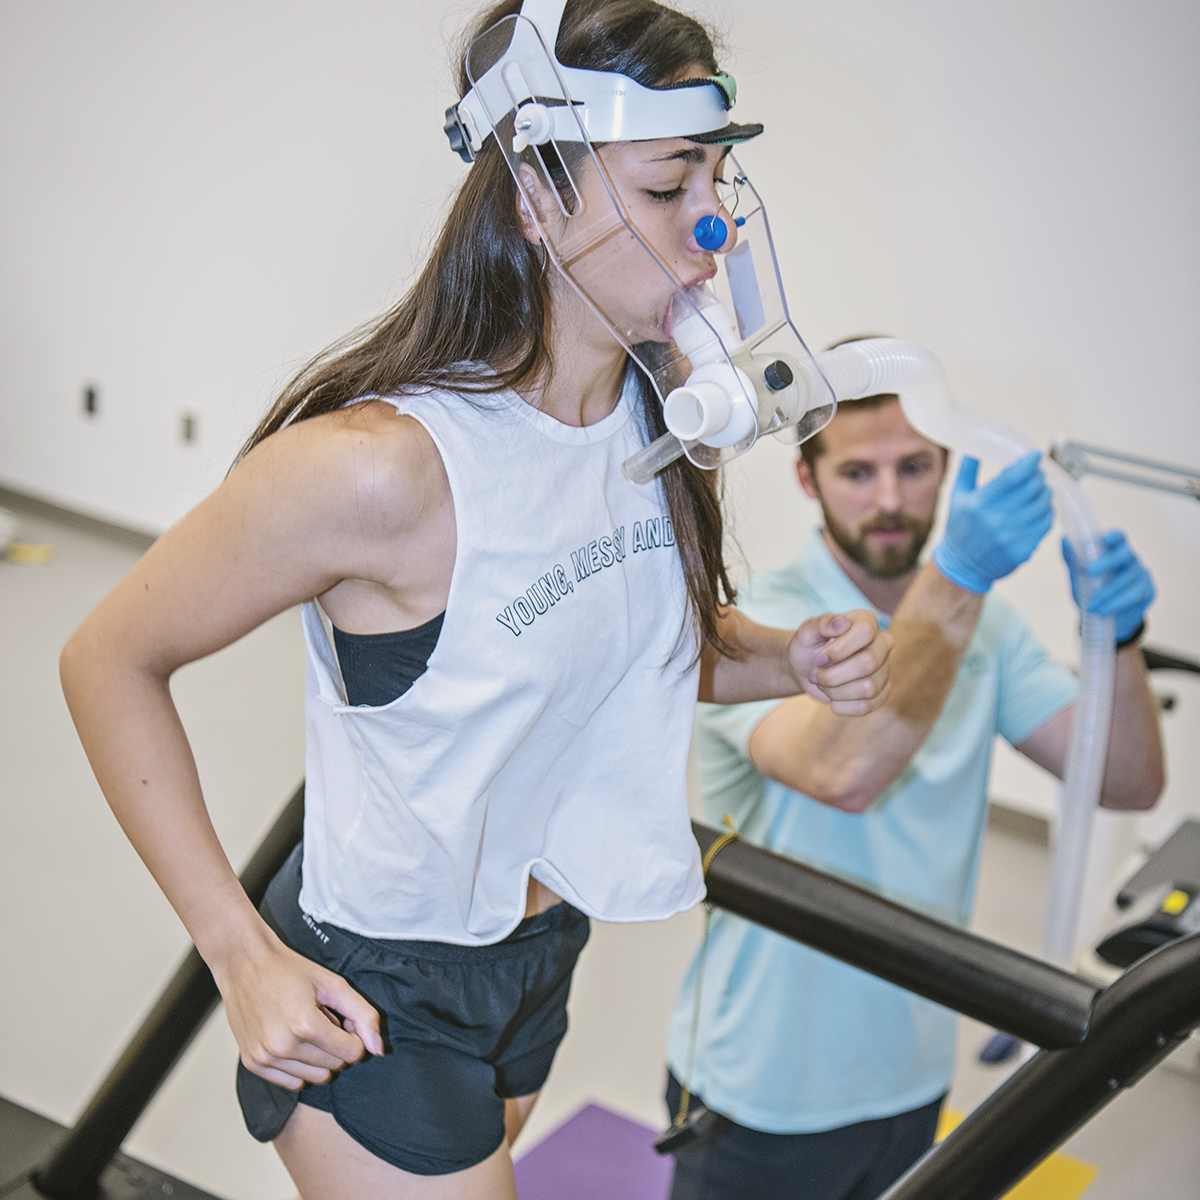 Cory Coehoorn helps student experience the VO2 Max machine